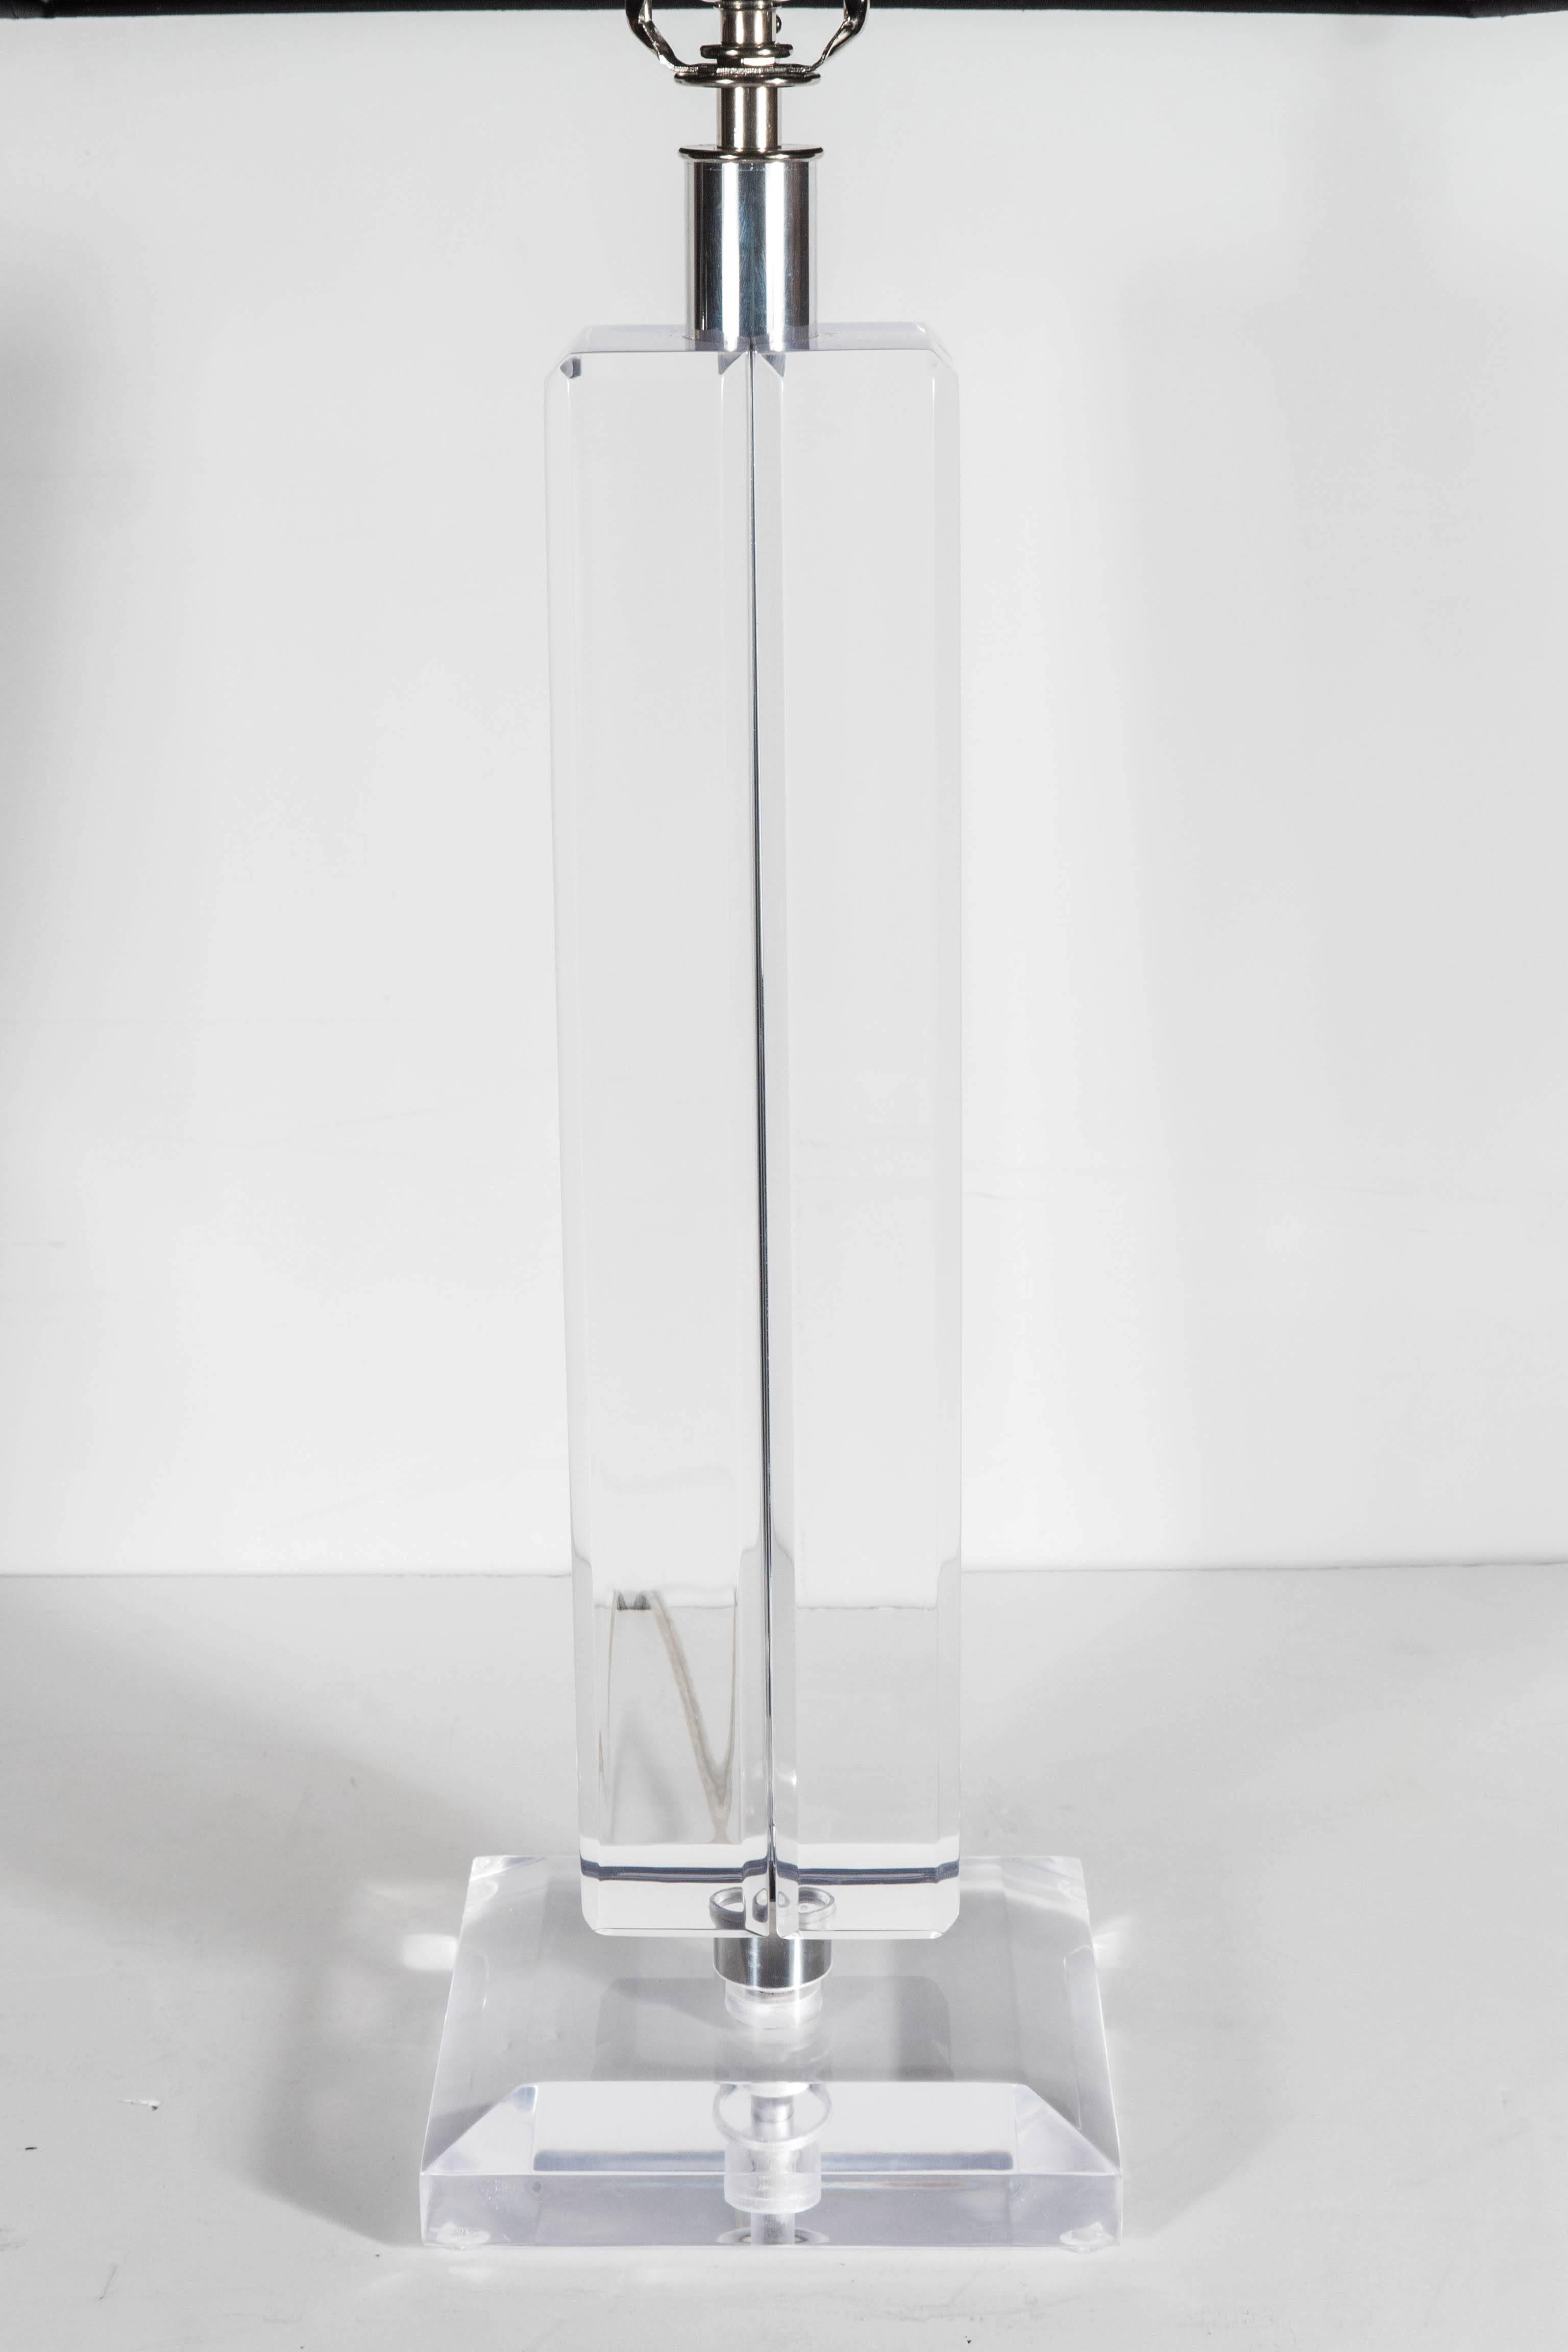 Ultra-chic pair of Mid-Century Modernist lamps in Lucite and chrome in the manner of Karl Springer. Thick, beveled bases and a chrome ring support two solid Lucite symmetrical stems. A very elegant pair for any bedside or occasional tables. The